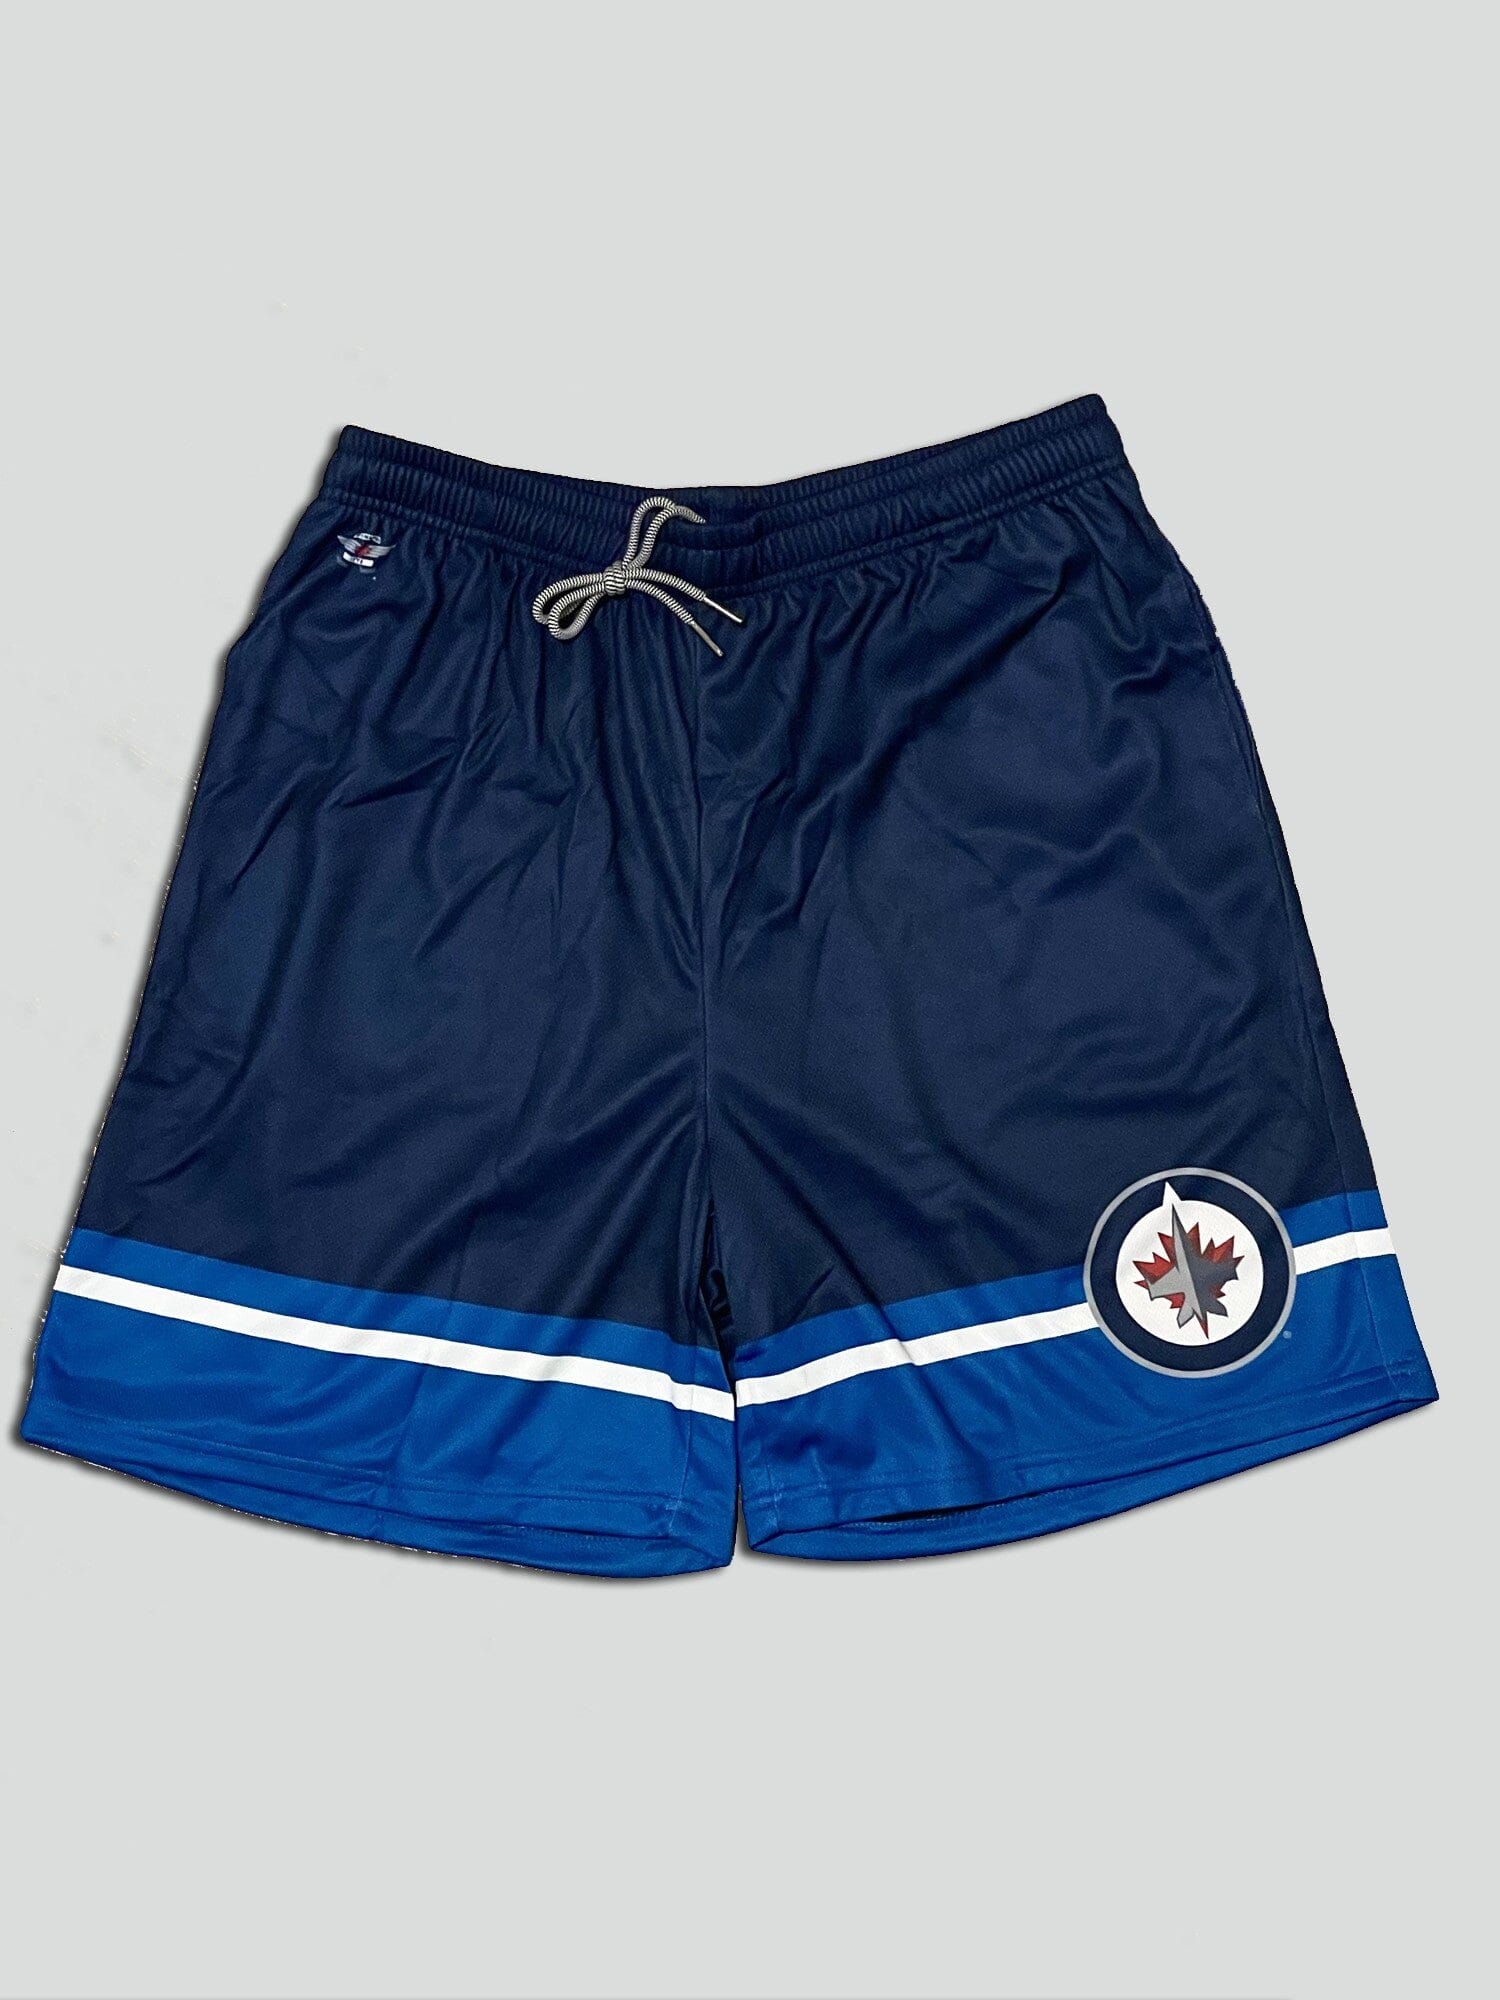 WIN_JETS_SHORTS_FRONT_2_COMP